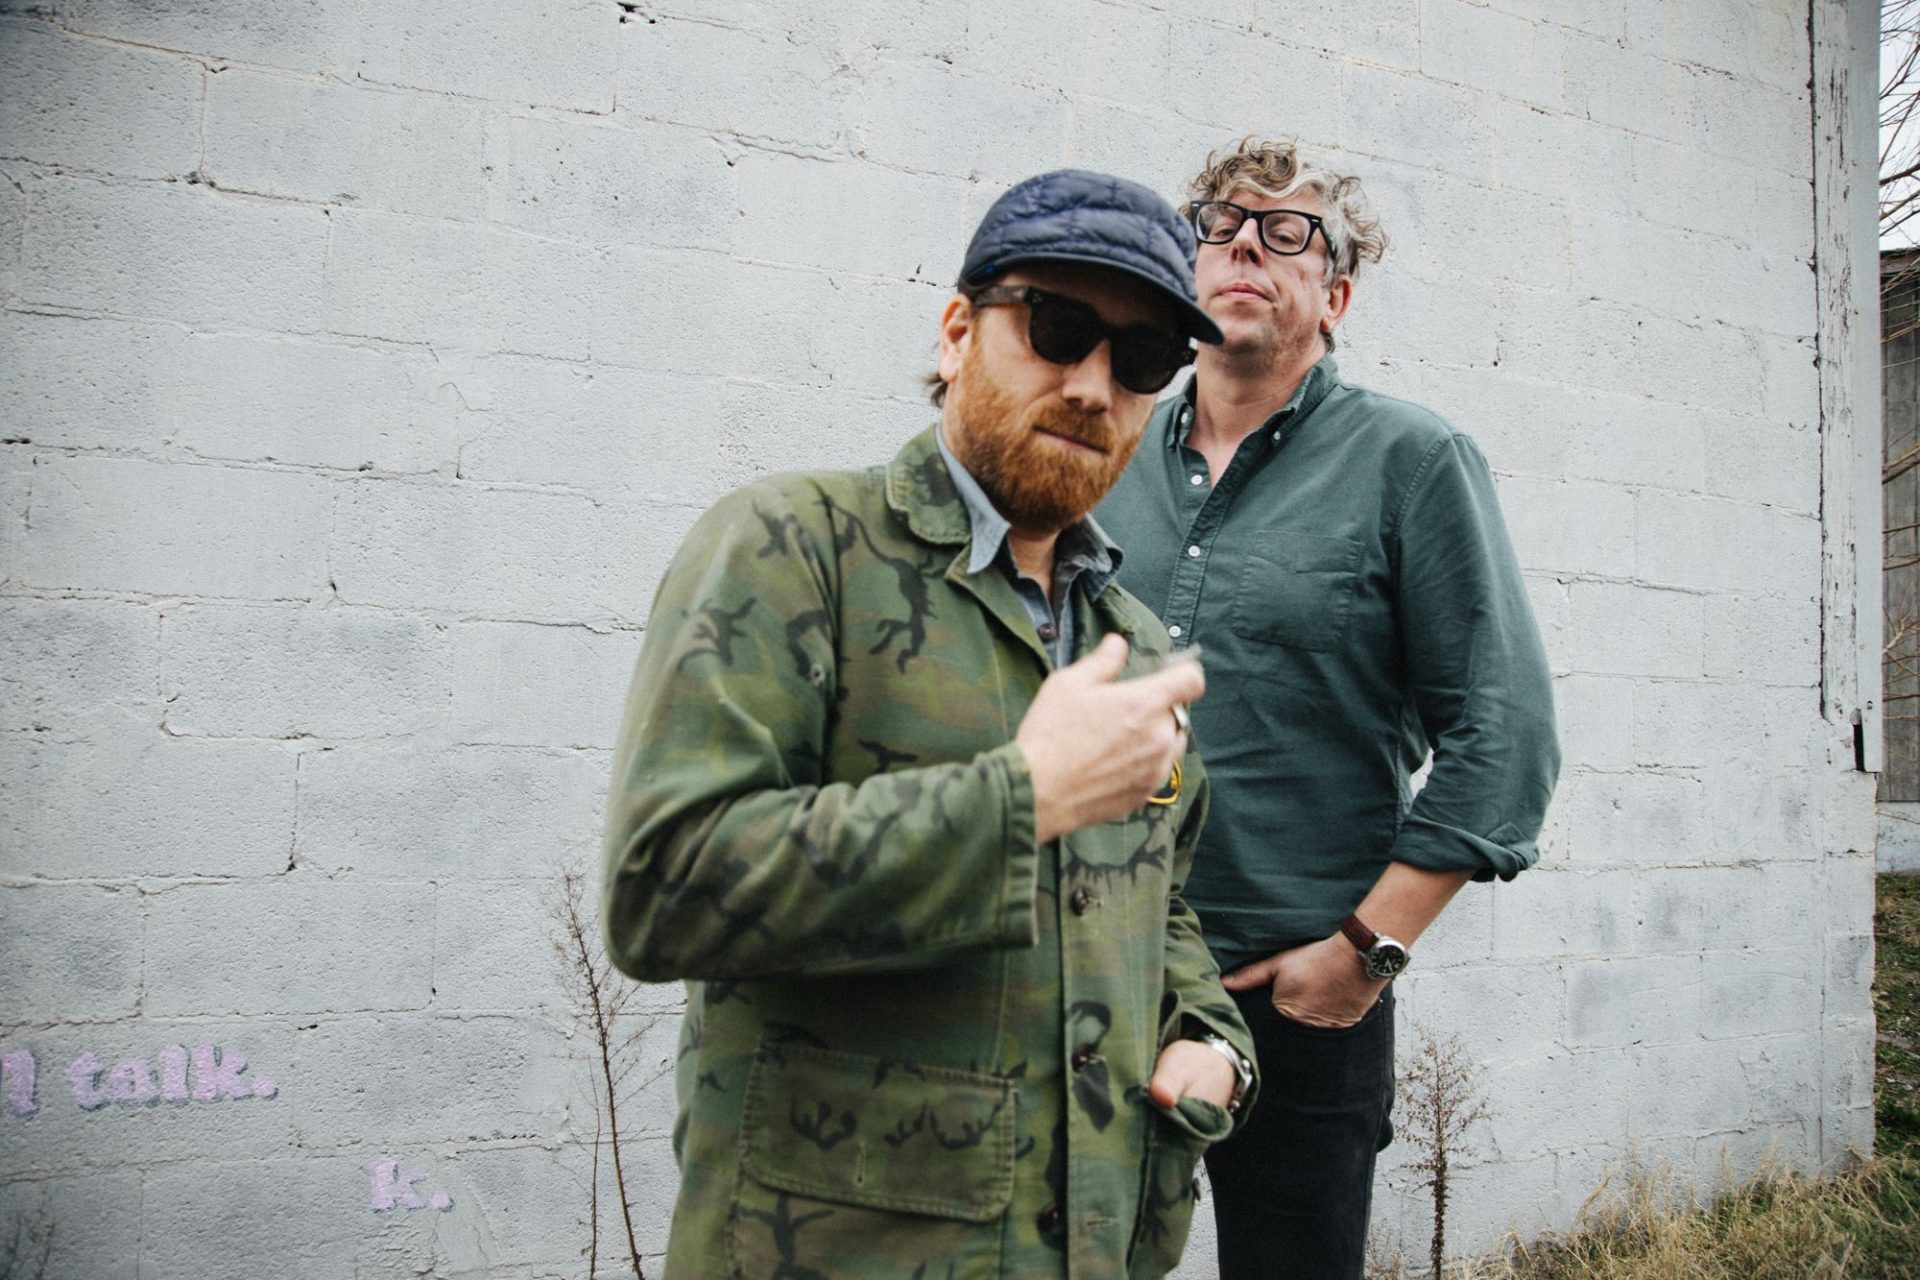 THE BLACK KEYS CELEBRATE MISSISSIPPI HILL COUNTRY BLUES WITH NEW ALBUM ‘DELTA KREAM’ ON MAY 14th